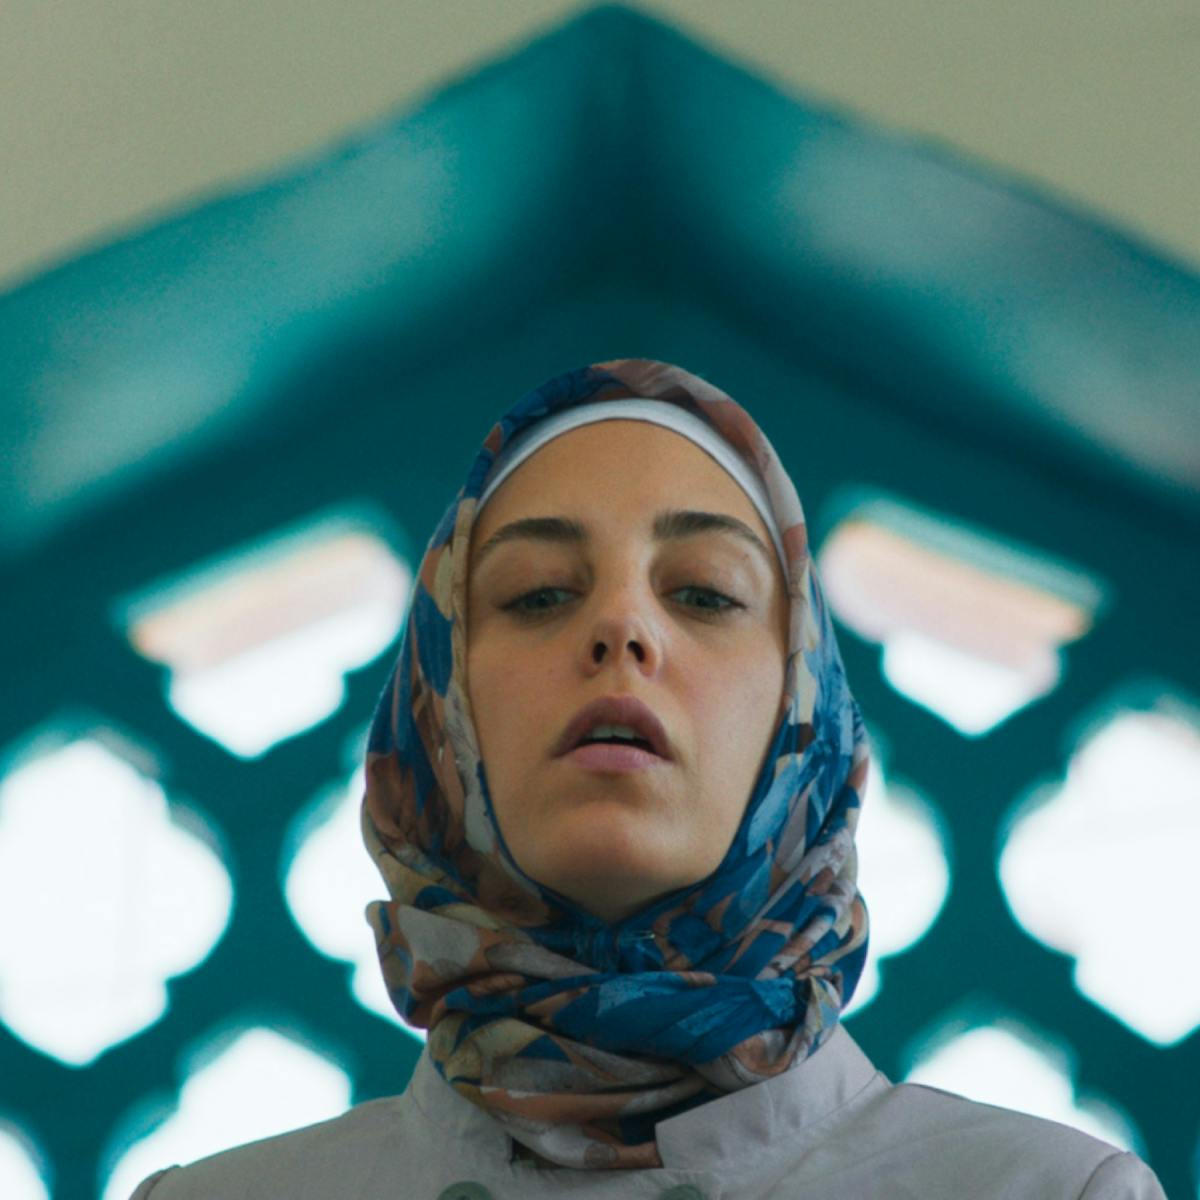 Meryem (actor Öykü Karayel) is framed from the shoulders up against a blue-framed arched window in this shot from Ethos. She wears a headscarf whose turquoise accents blend with the architecture behind her. 